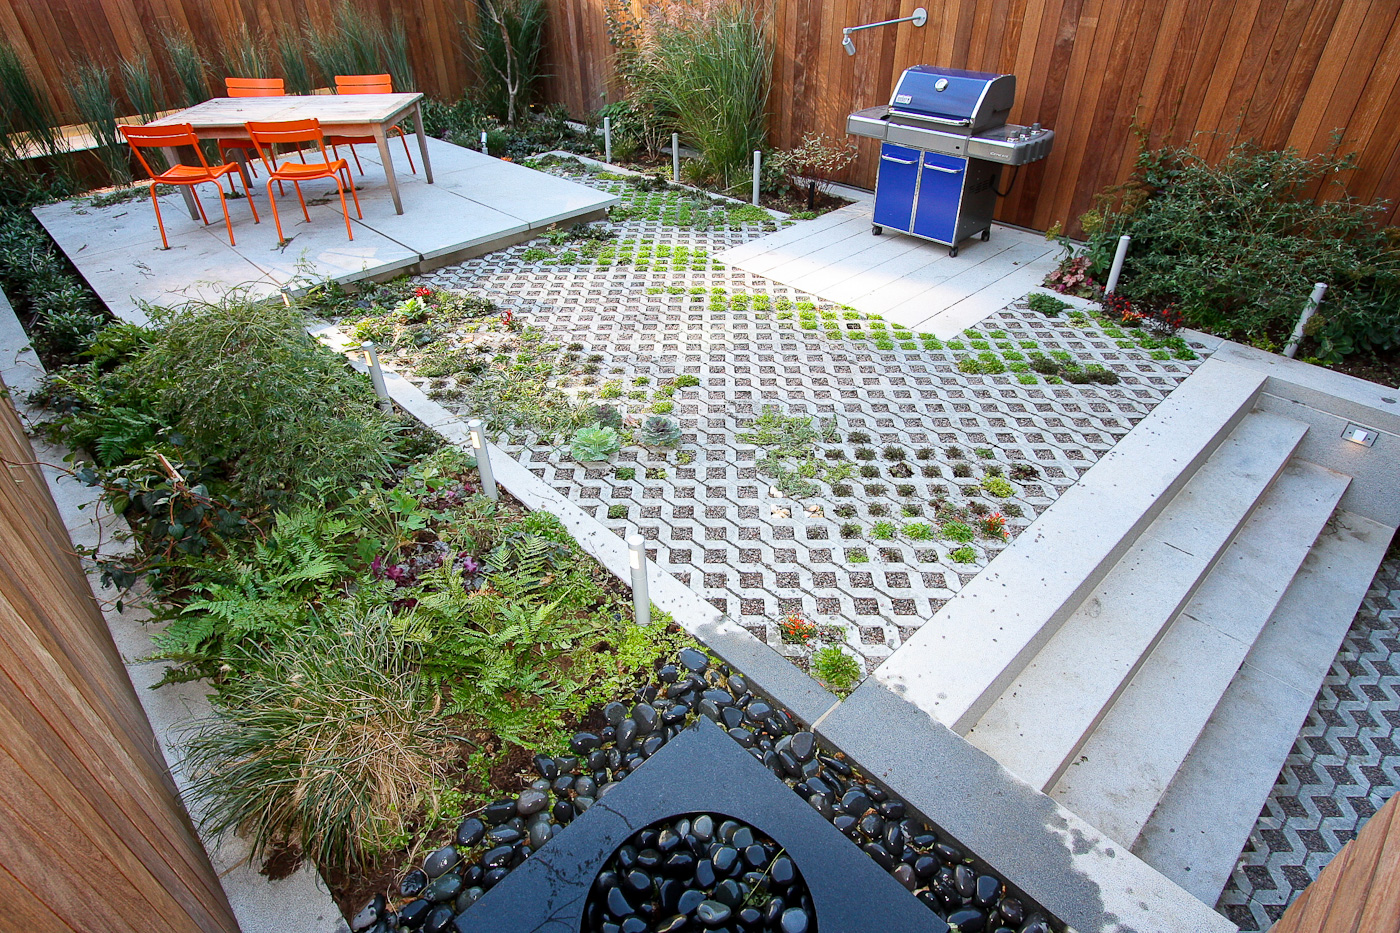 Outdoor Living Room, Boerum Hill, Brooklyn - Outdoor Space Landscaping